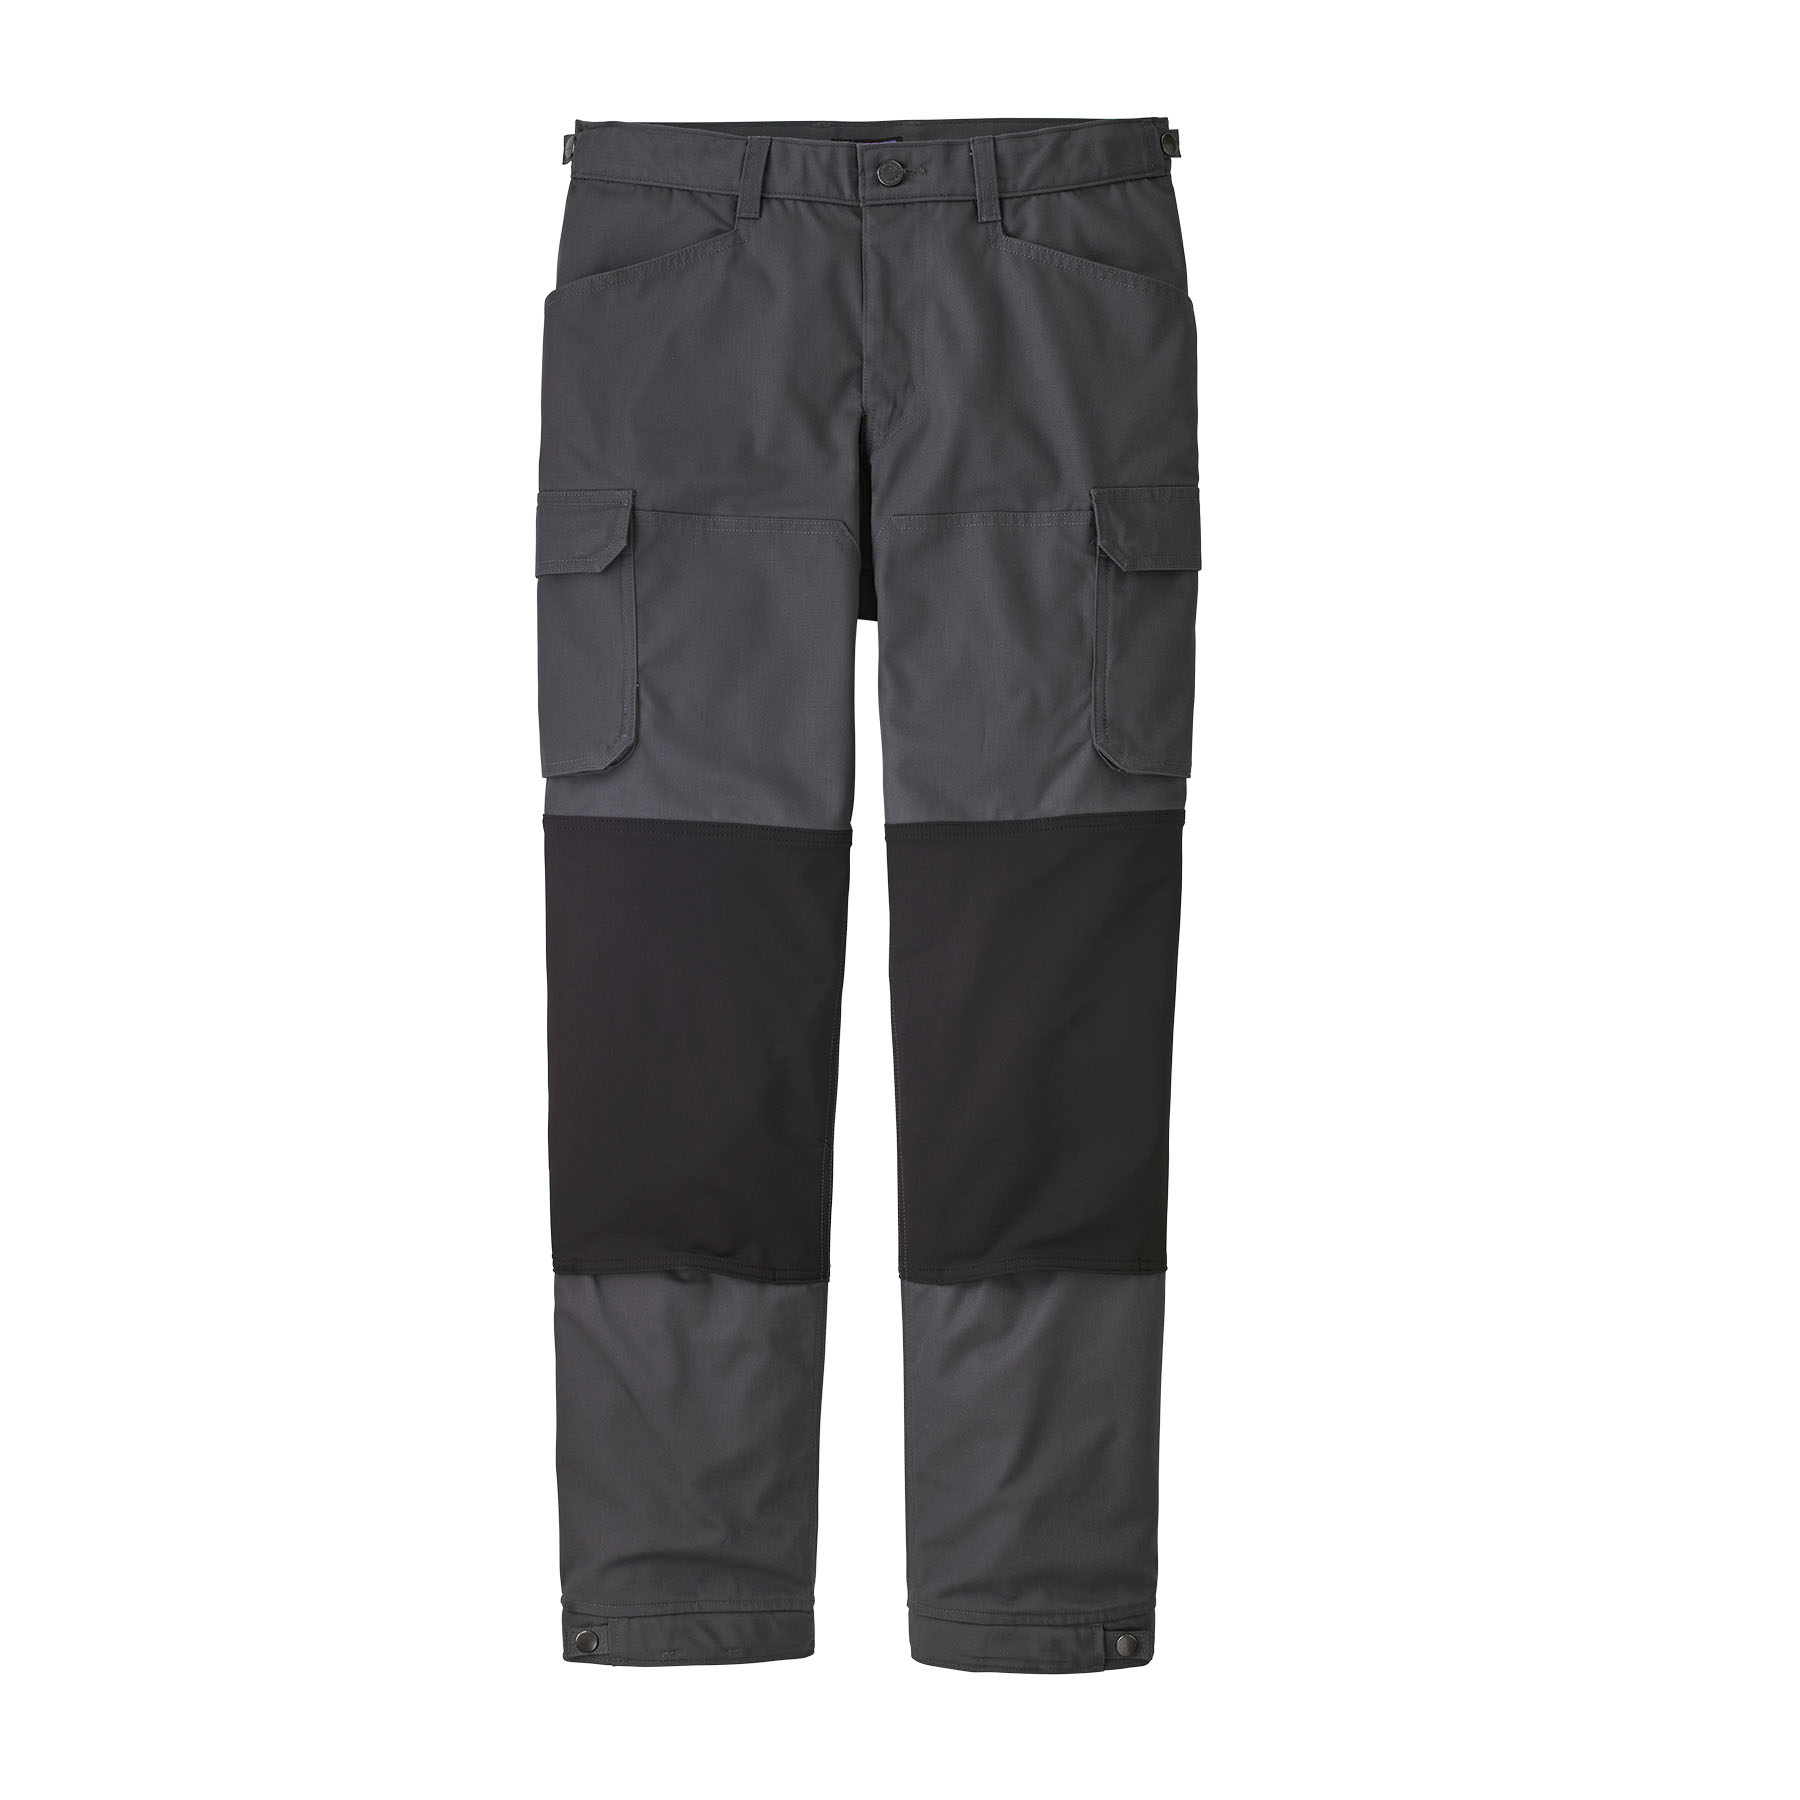 Patagonia Women's R2 TechFace Pants - Forge Grey - Ed's Fly Shop